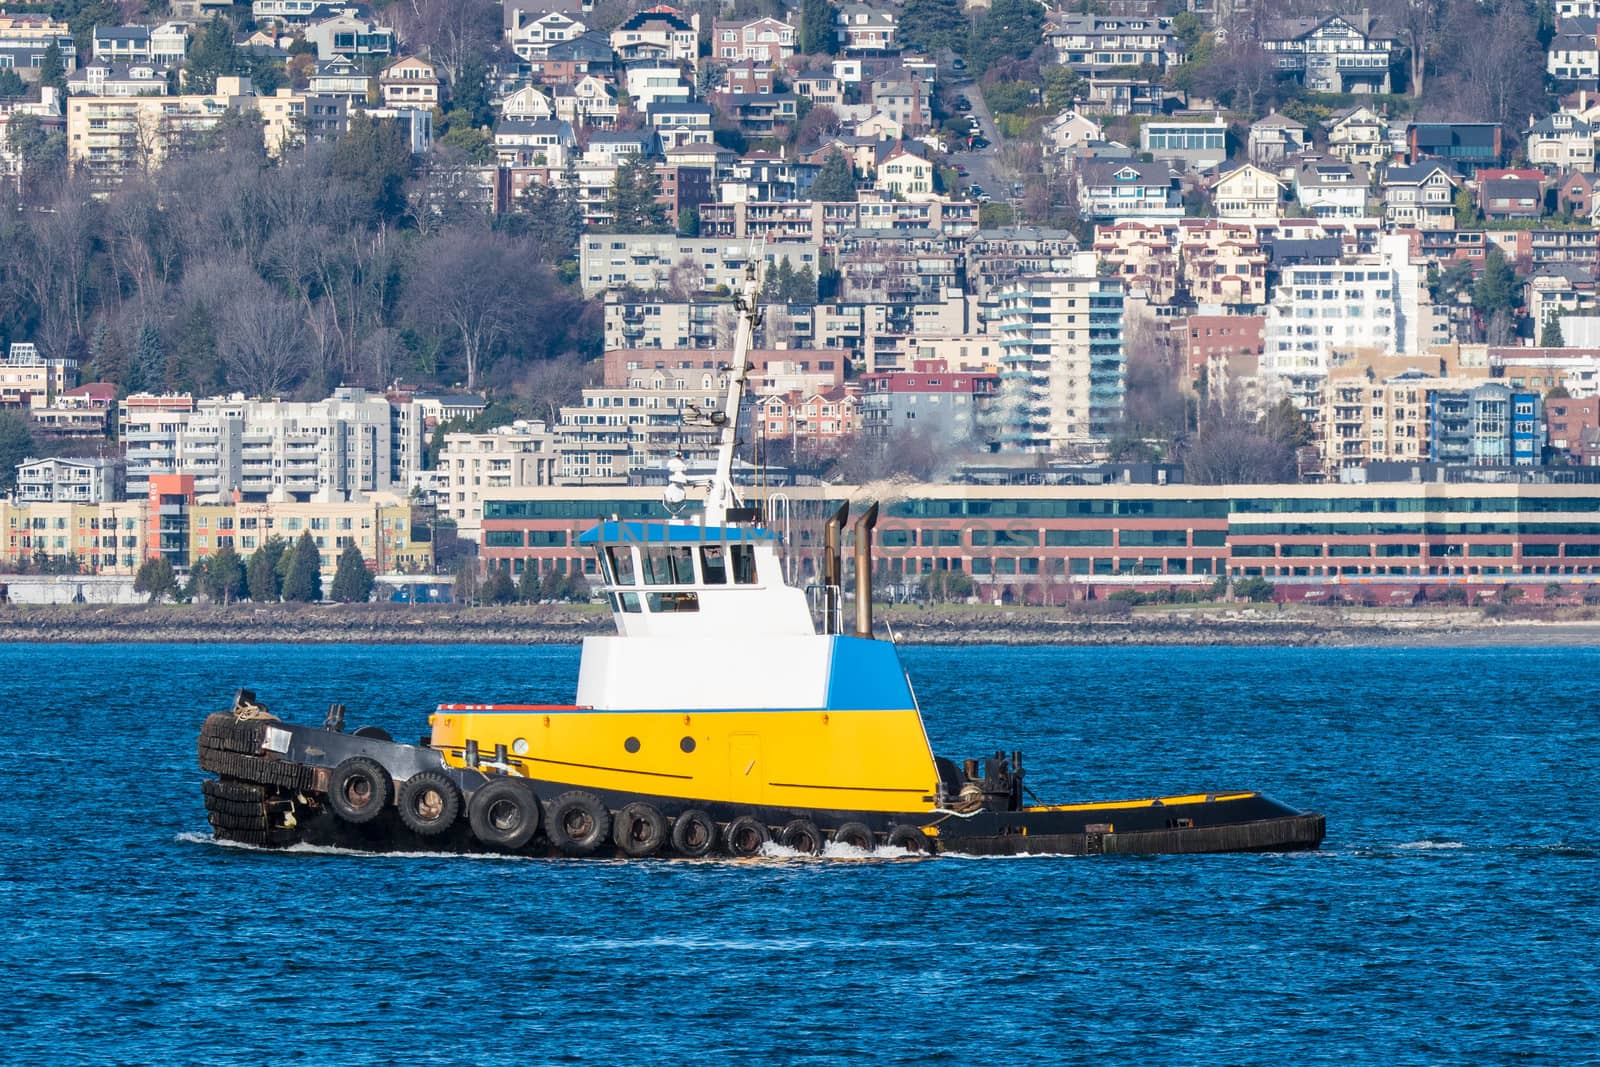 Tug plying the waters of Seattle's Elliott Bay on the way to pick up a tow.